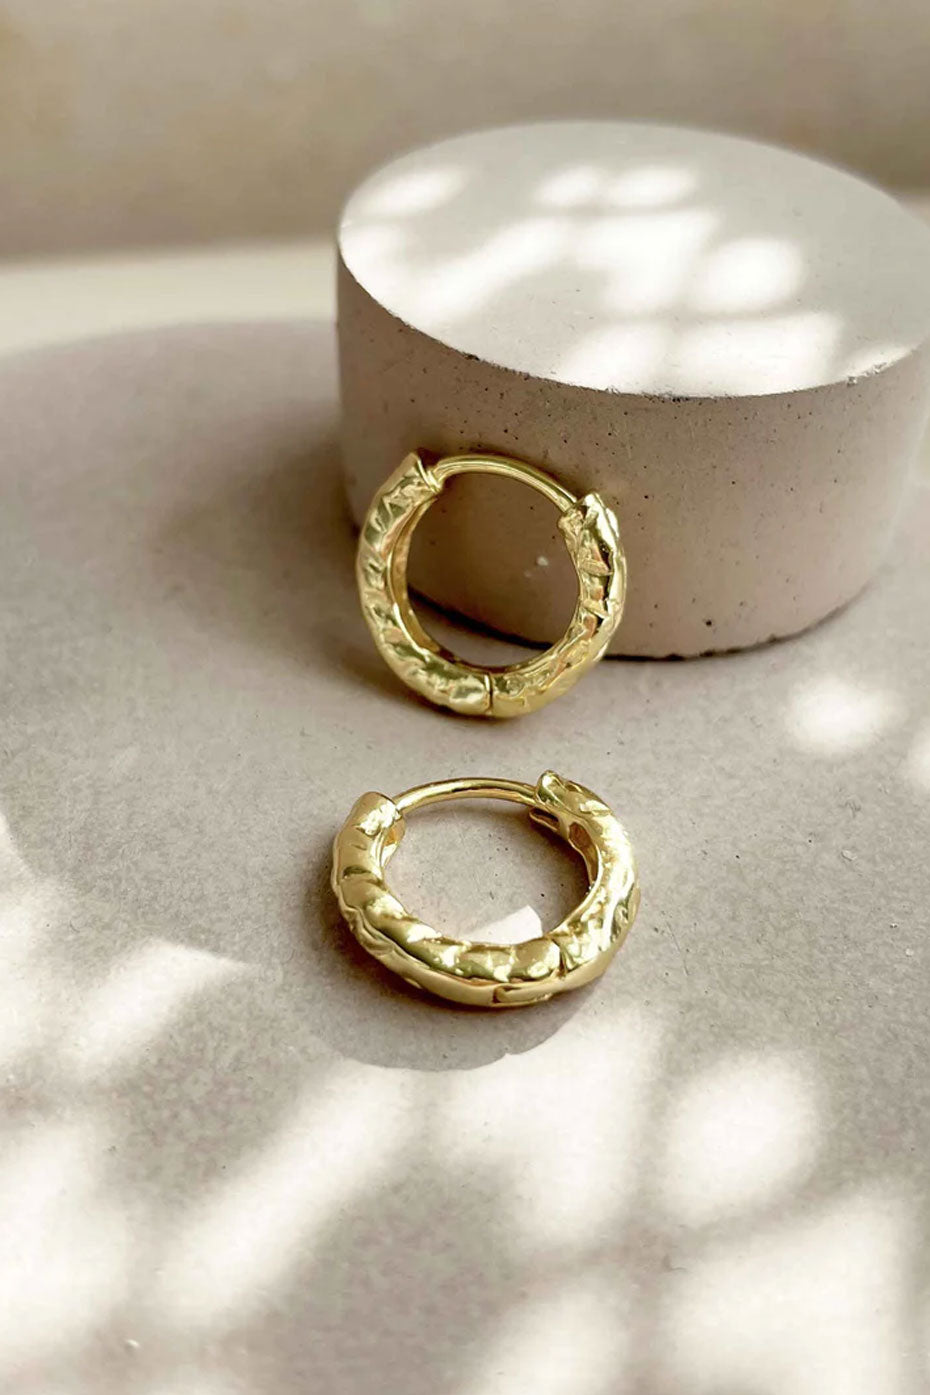 Formation Maui Textured Round Hoops